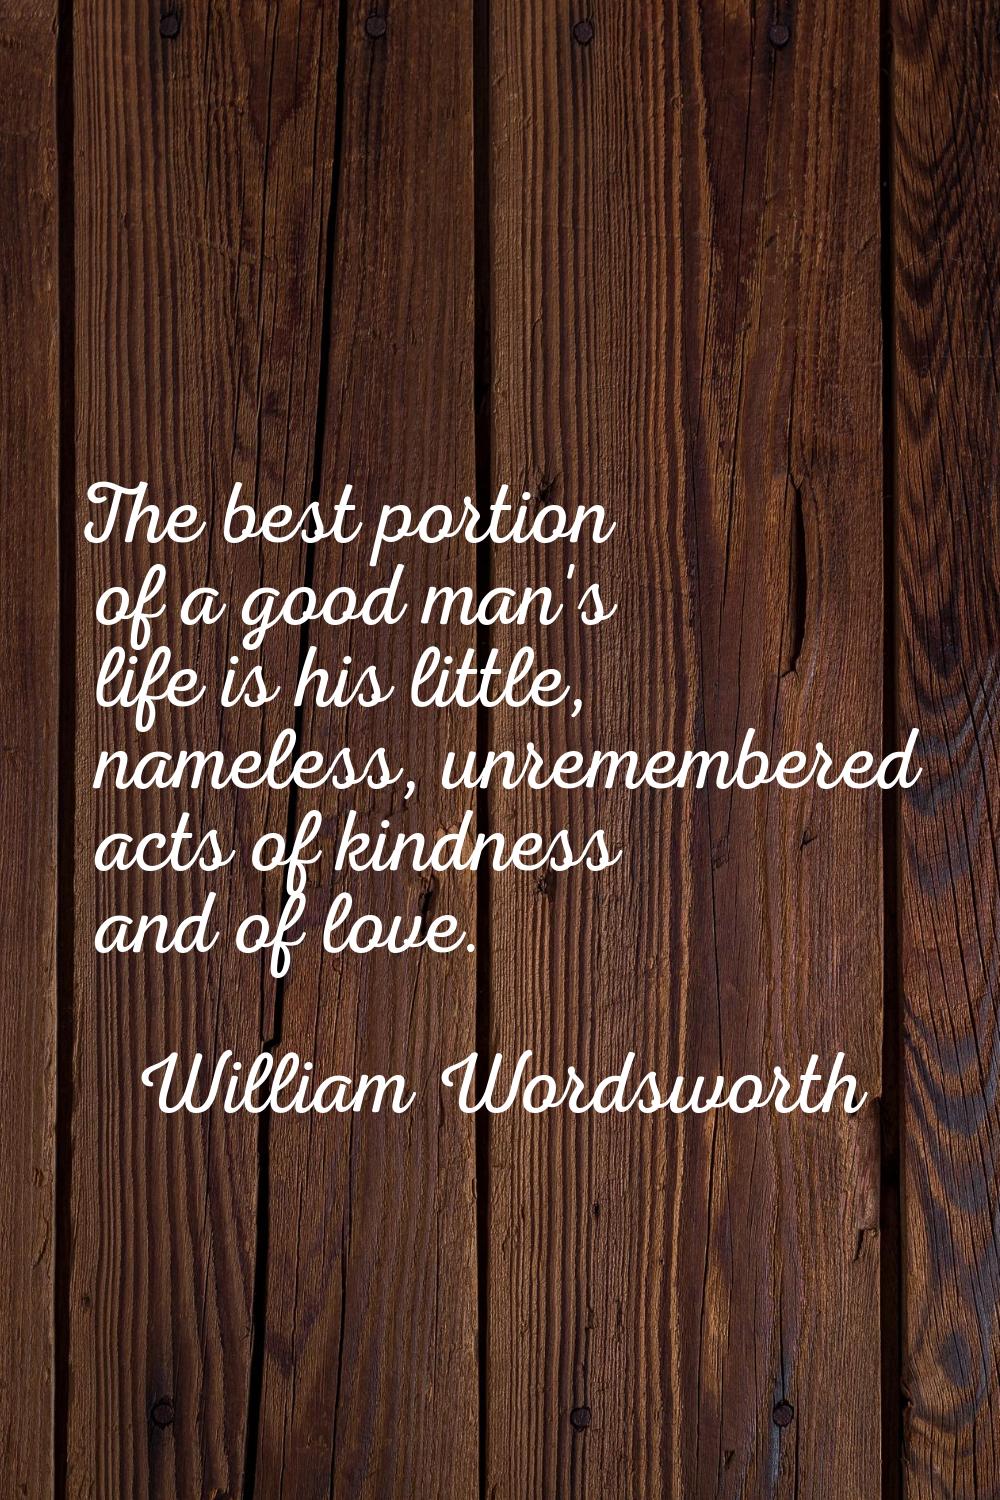 The best portion of a good man's life is his little, nameless, unremembered acts of kindness and of